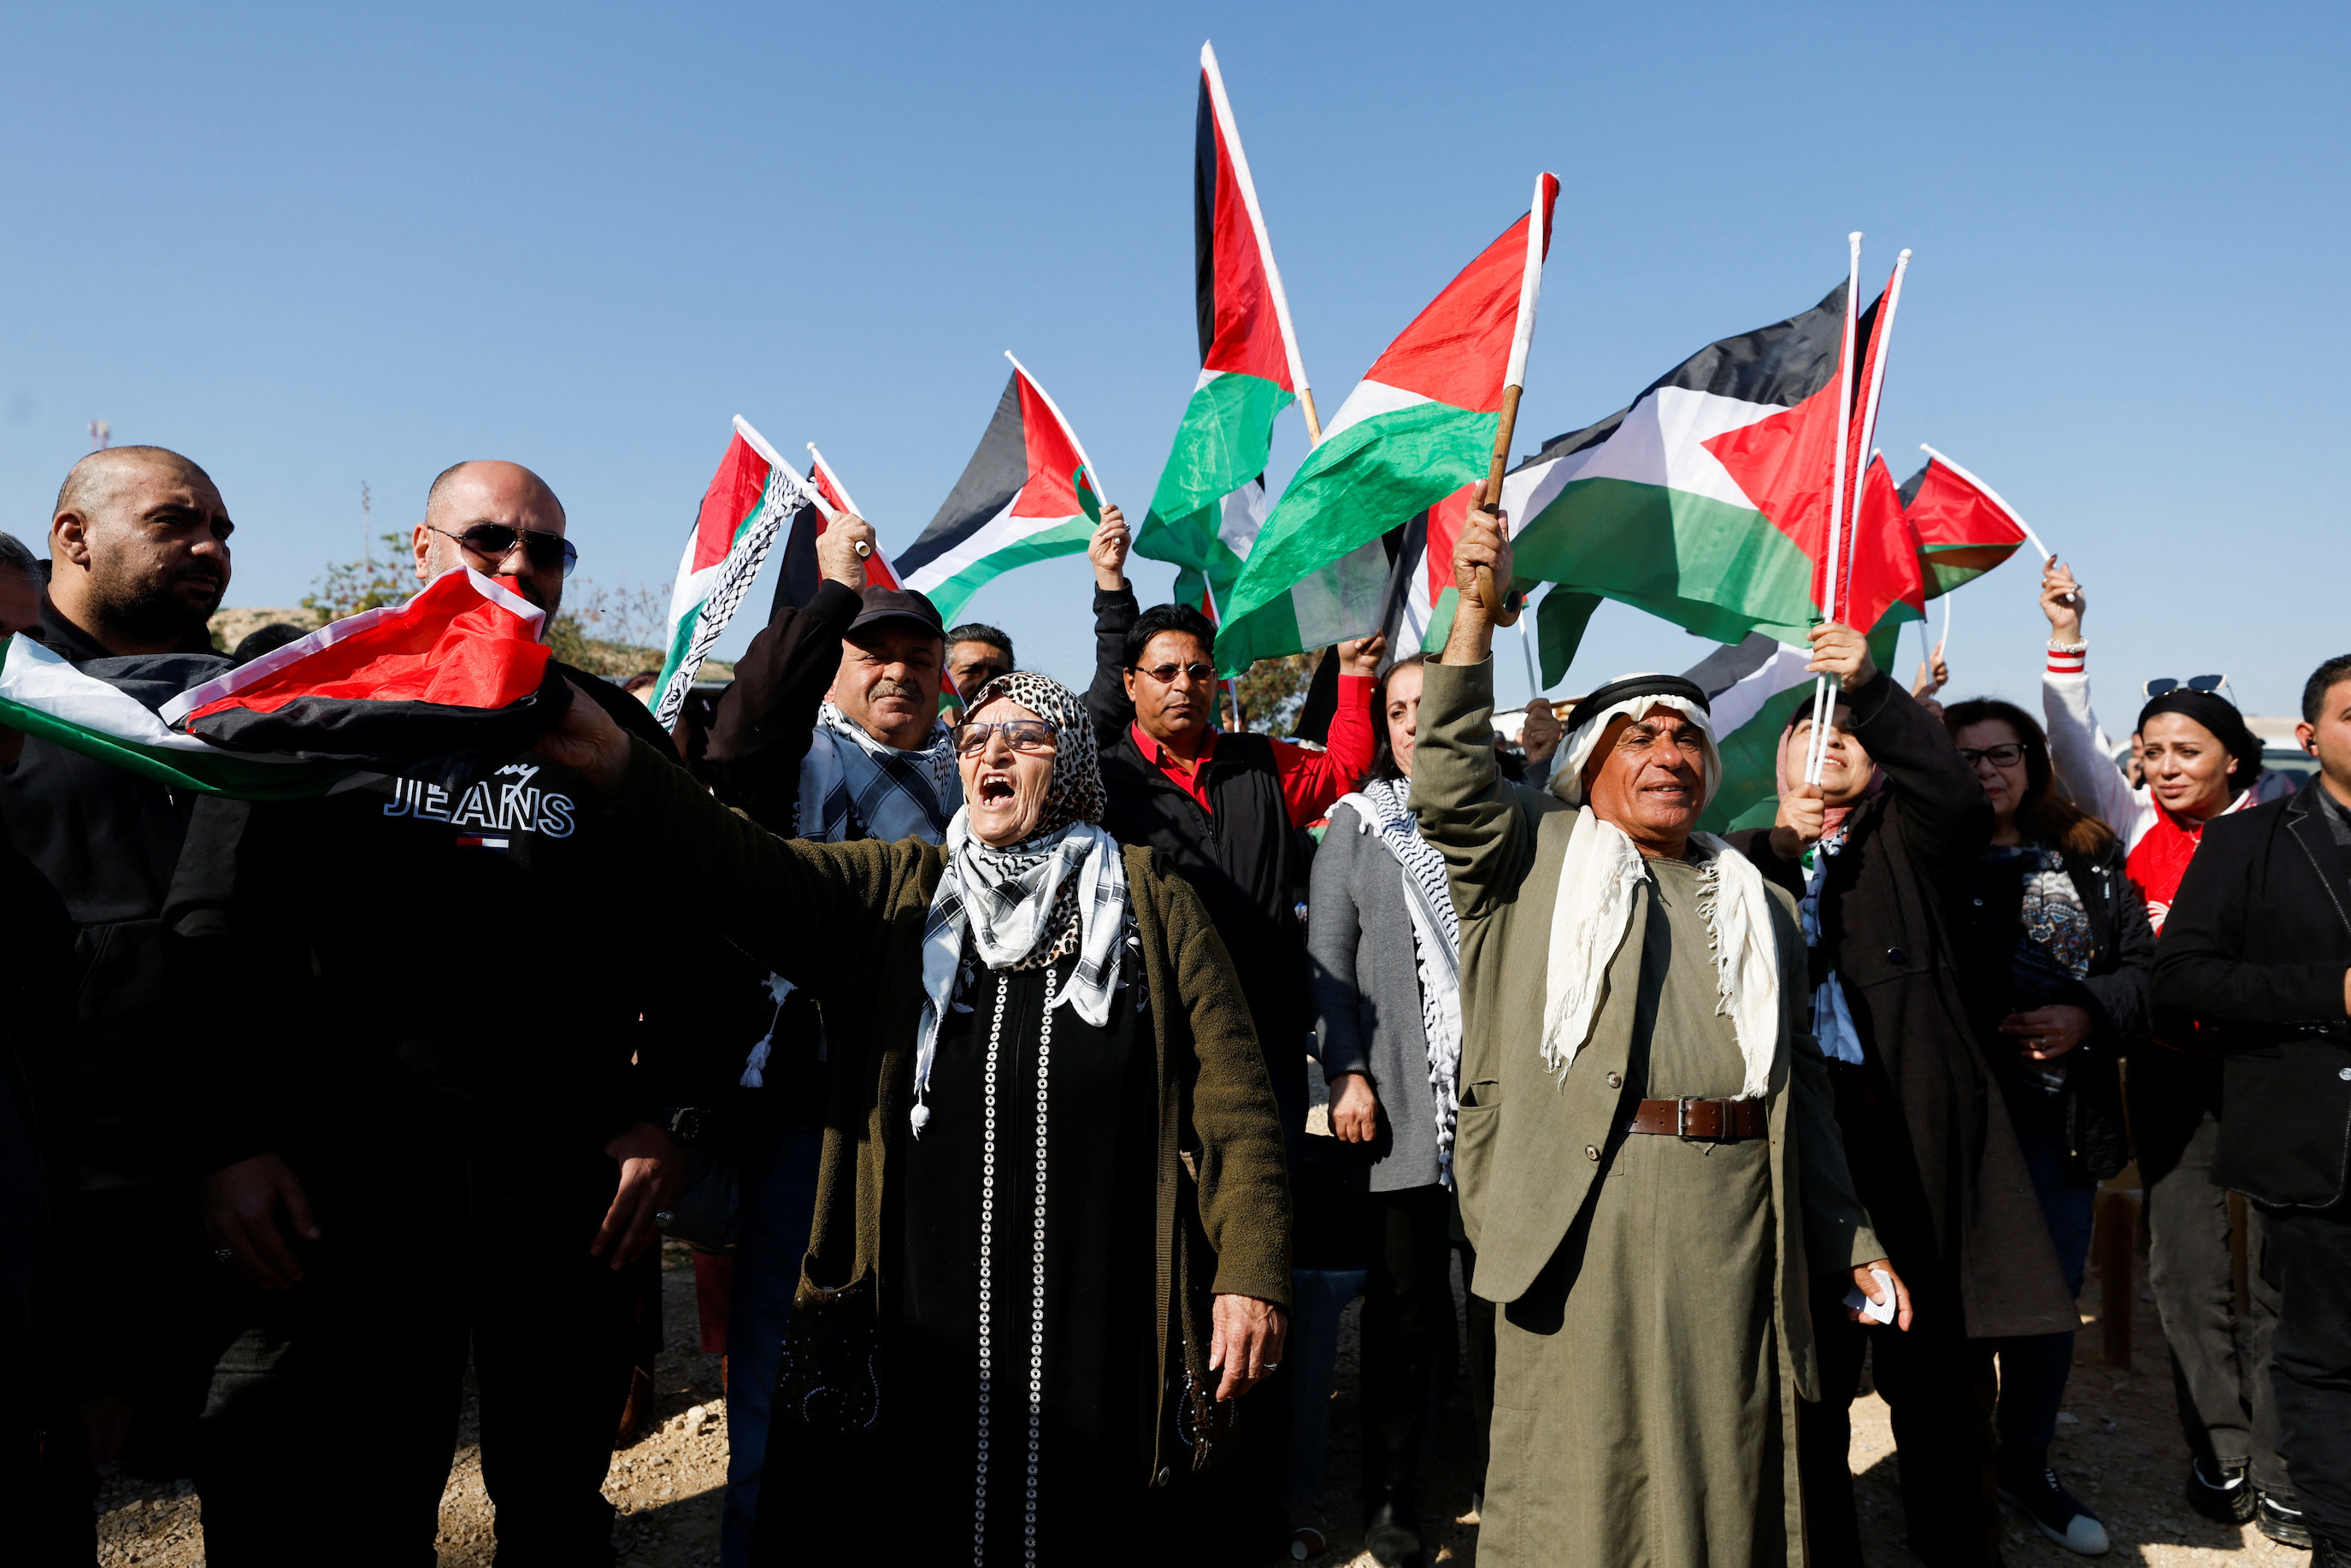 Bedouins protest